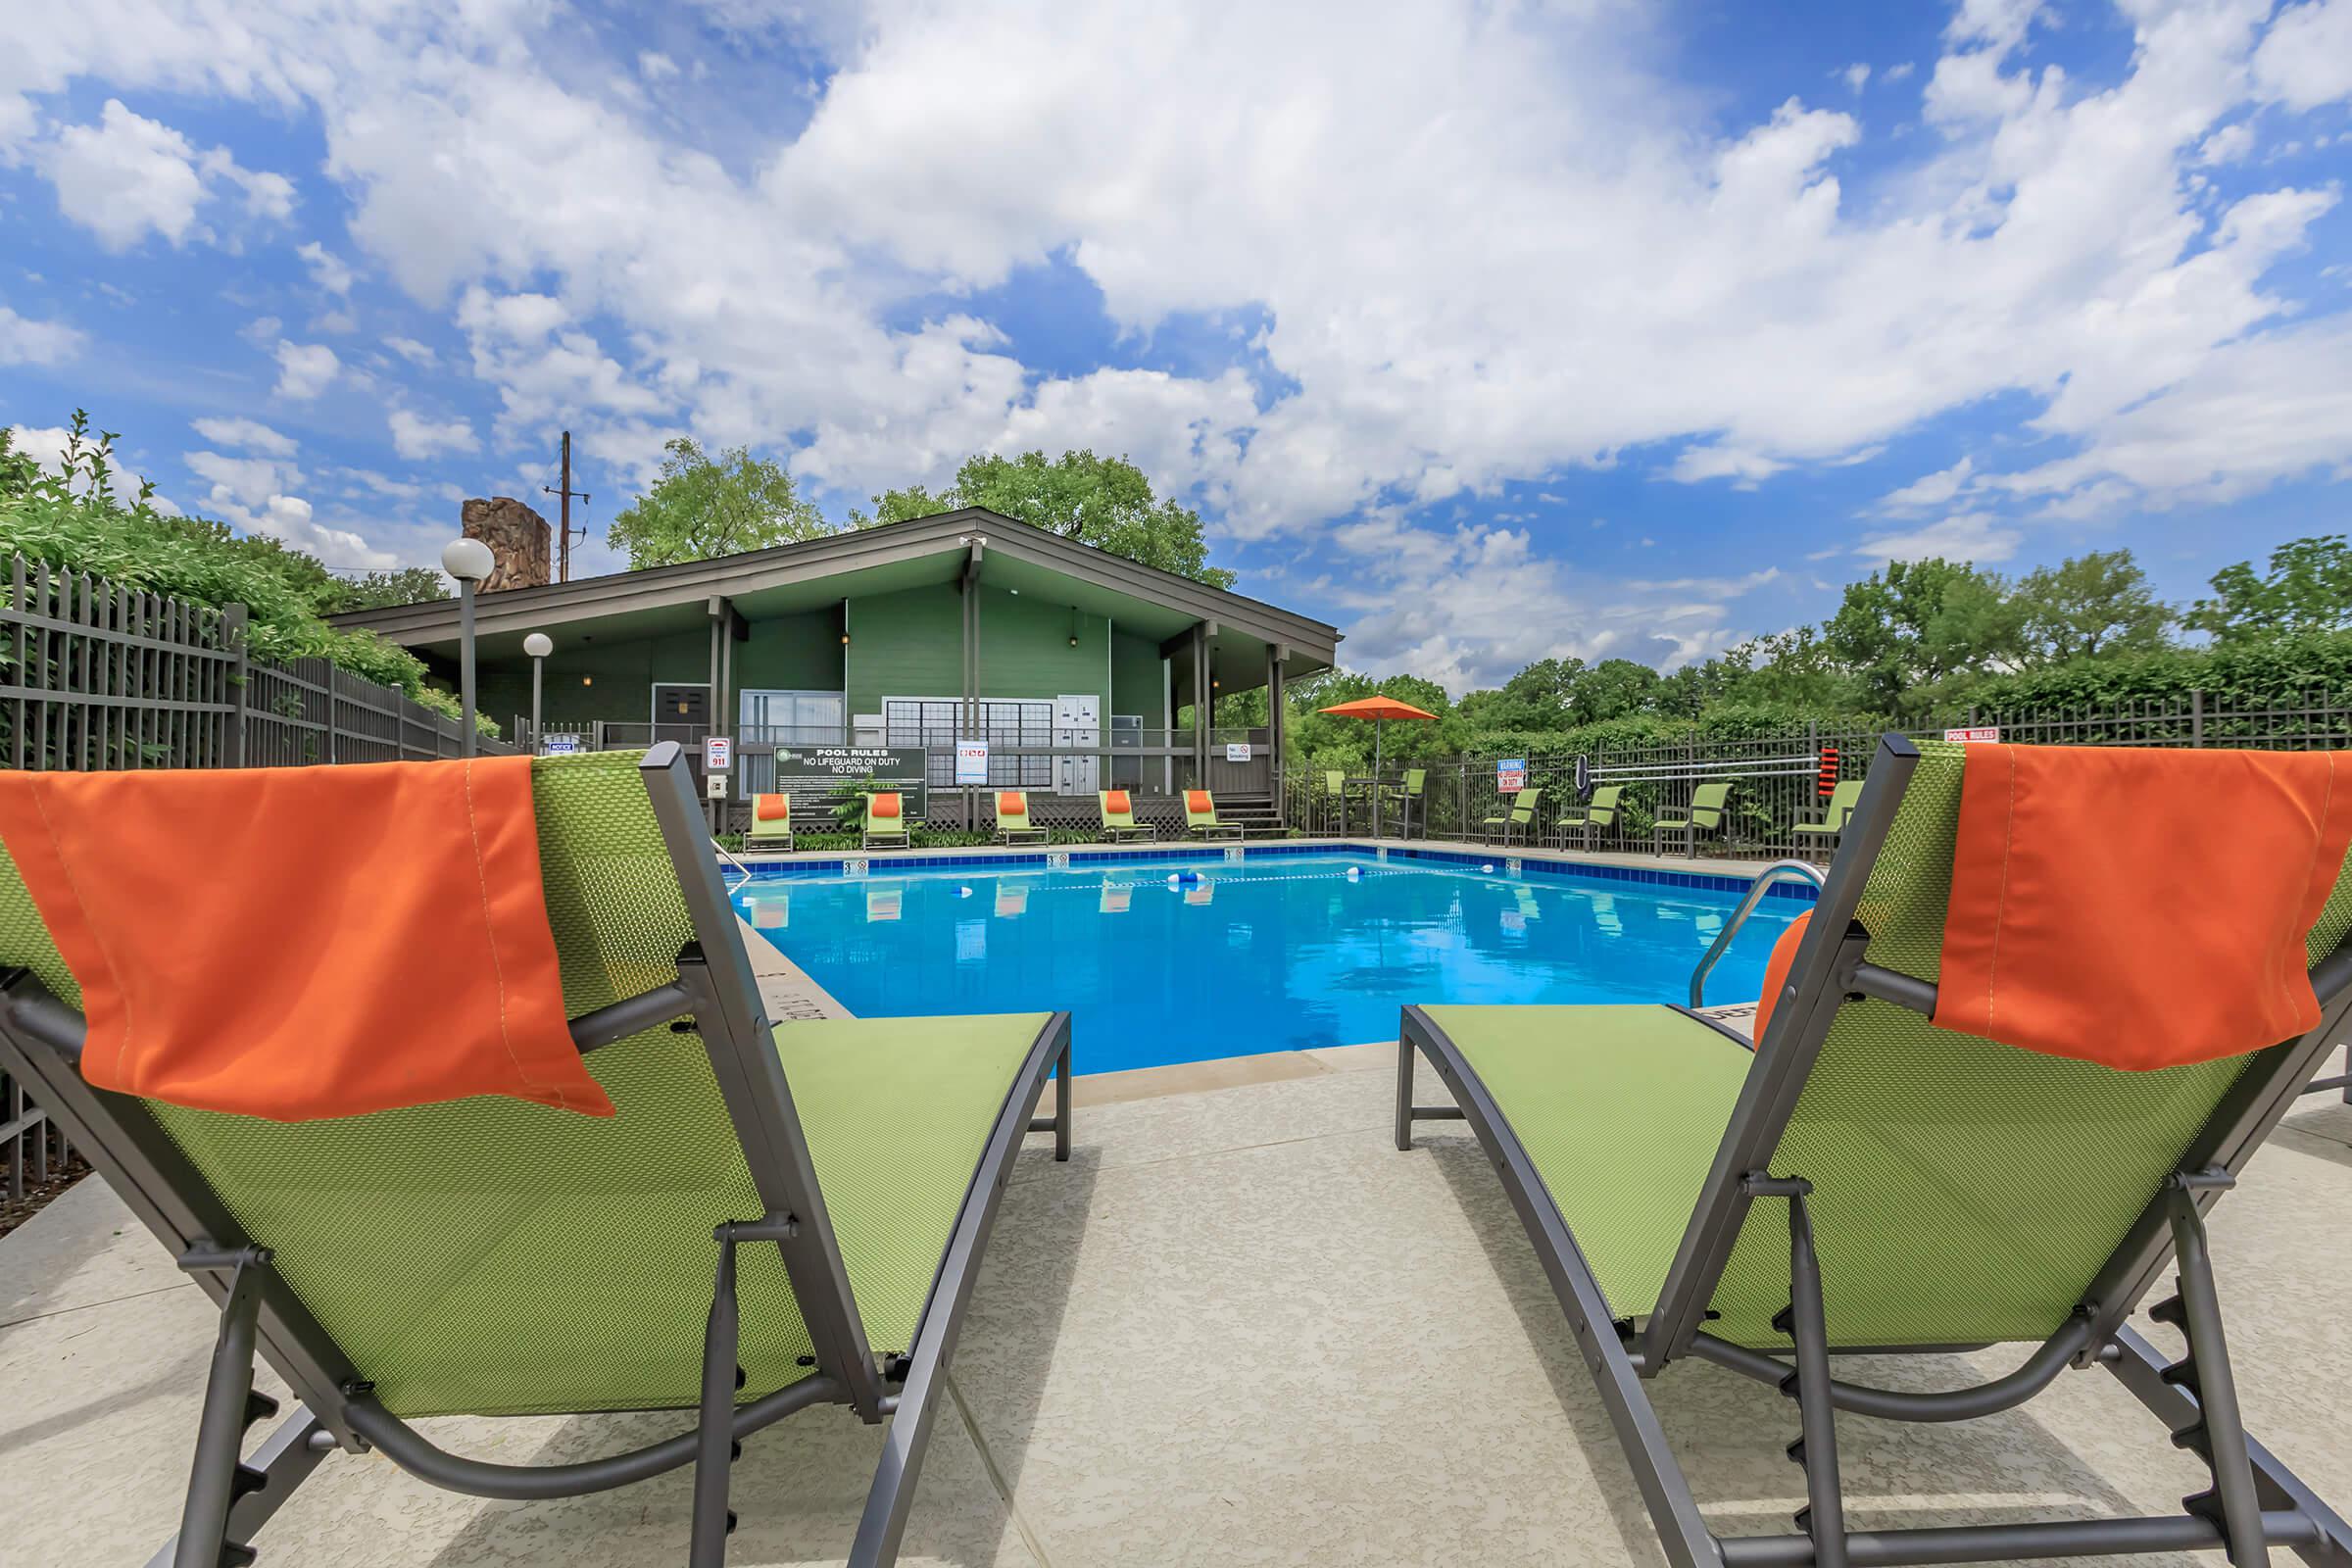 get your vitamin D in the pool area at Sunrise Apartments in Nashville, Tennessee